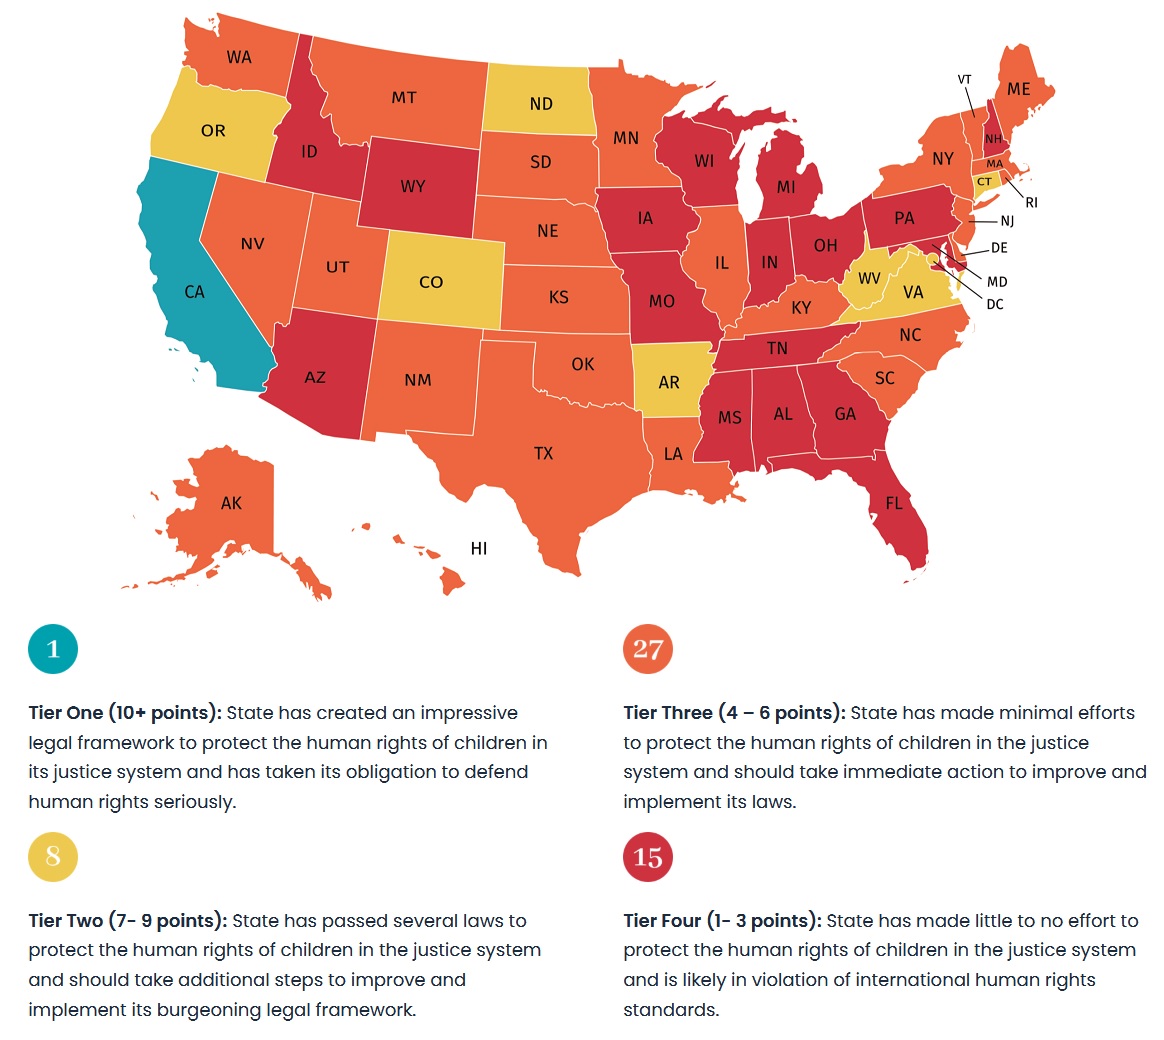 human rights protections for children in justice system report; map of state rankings